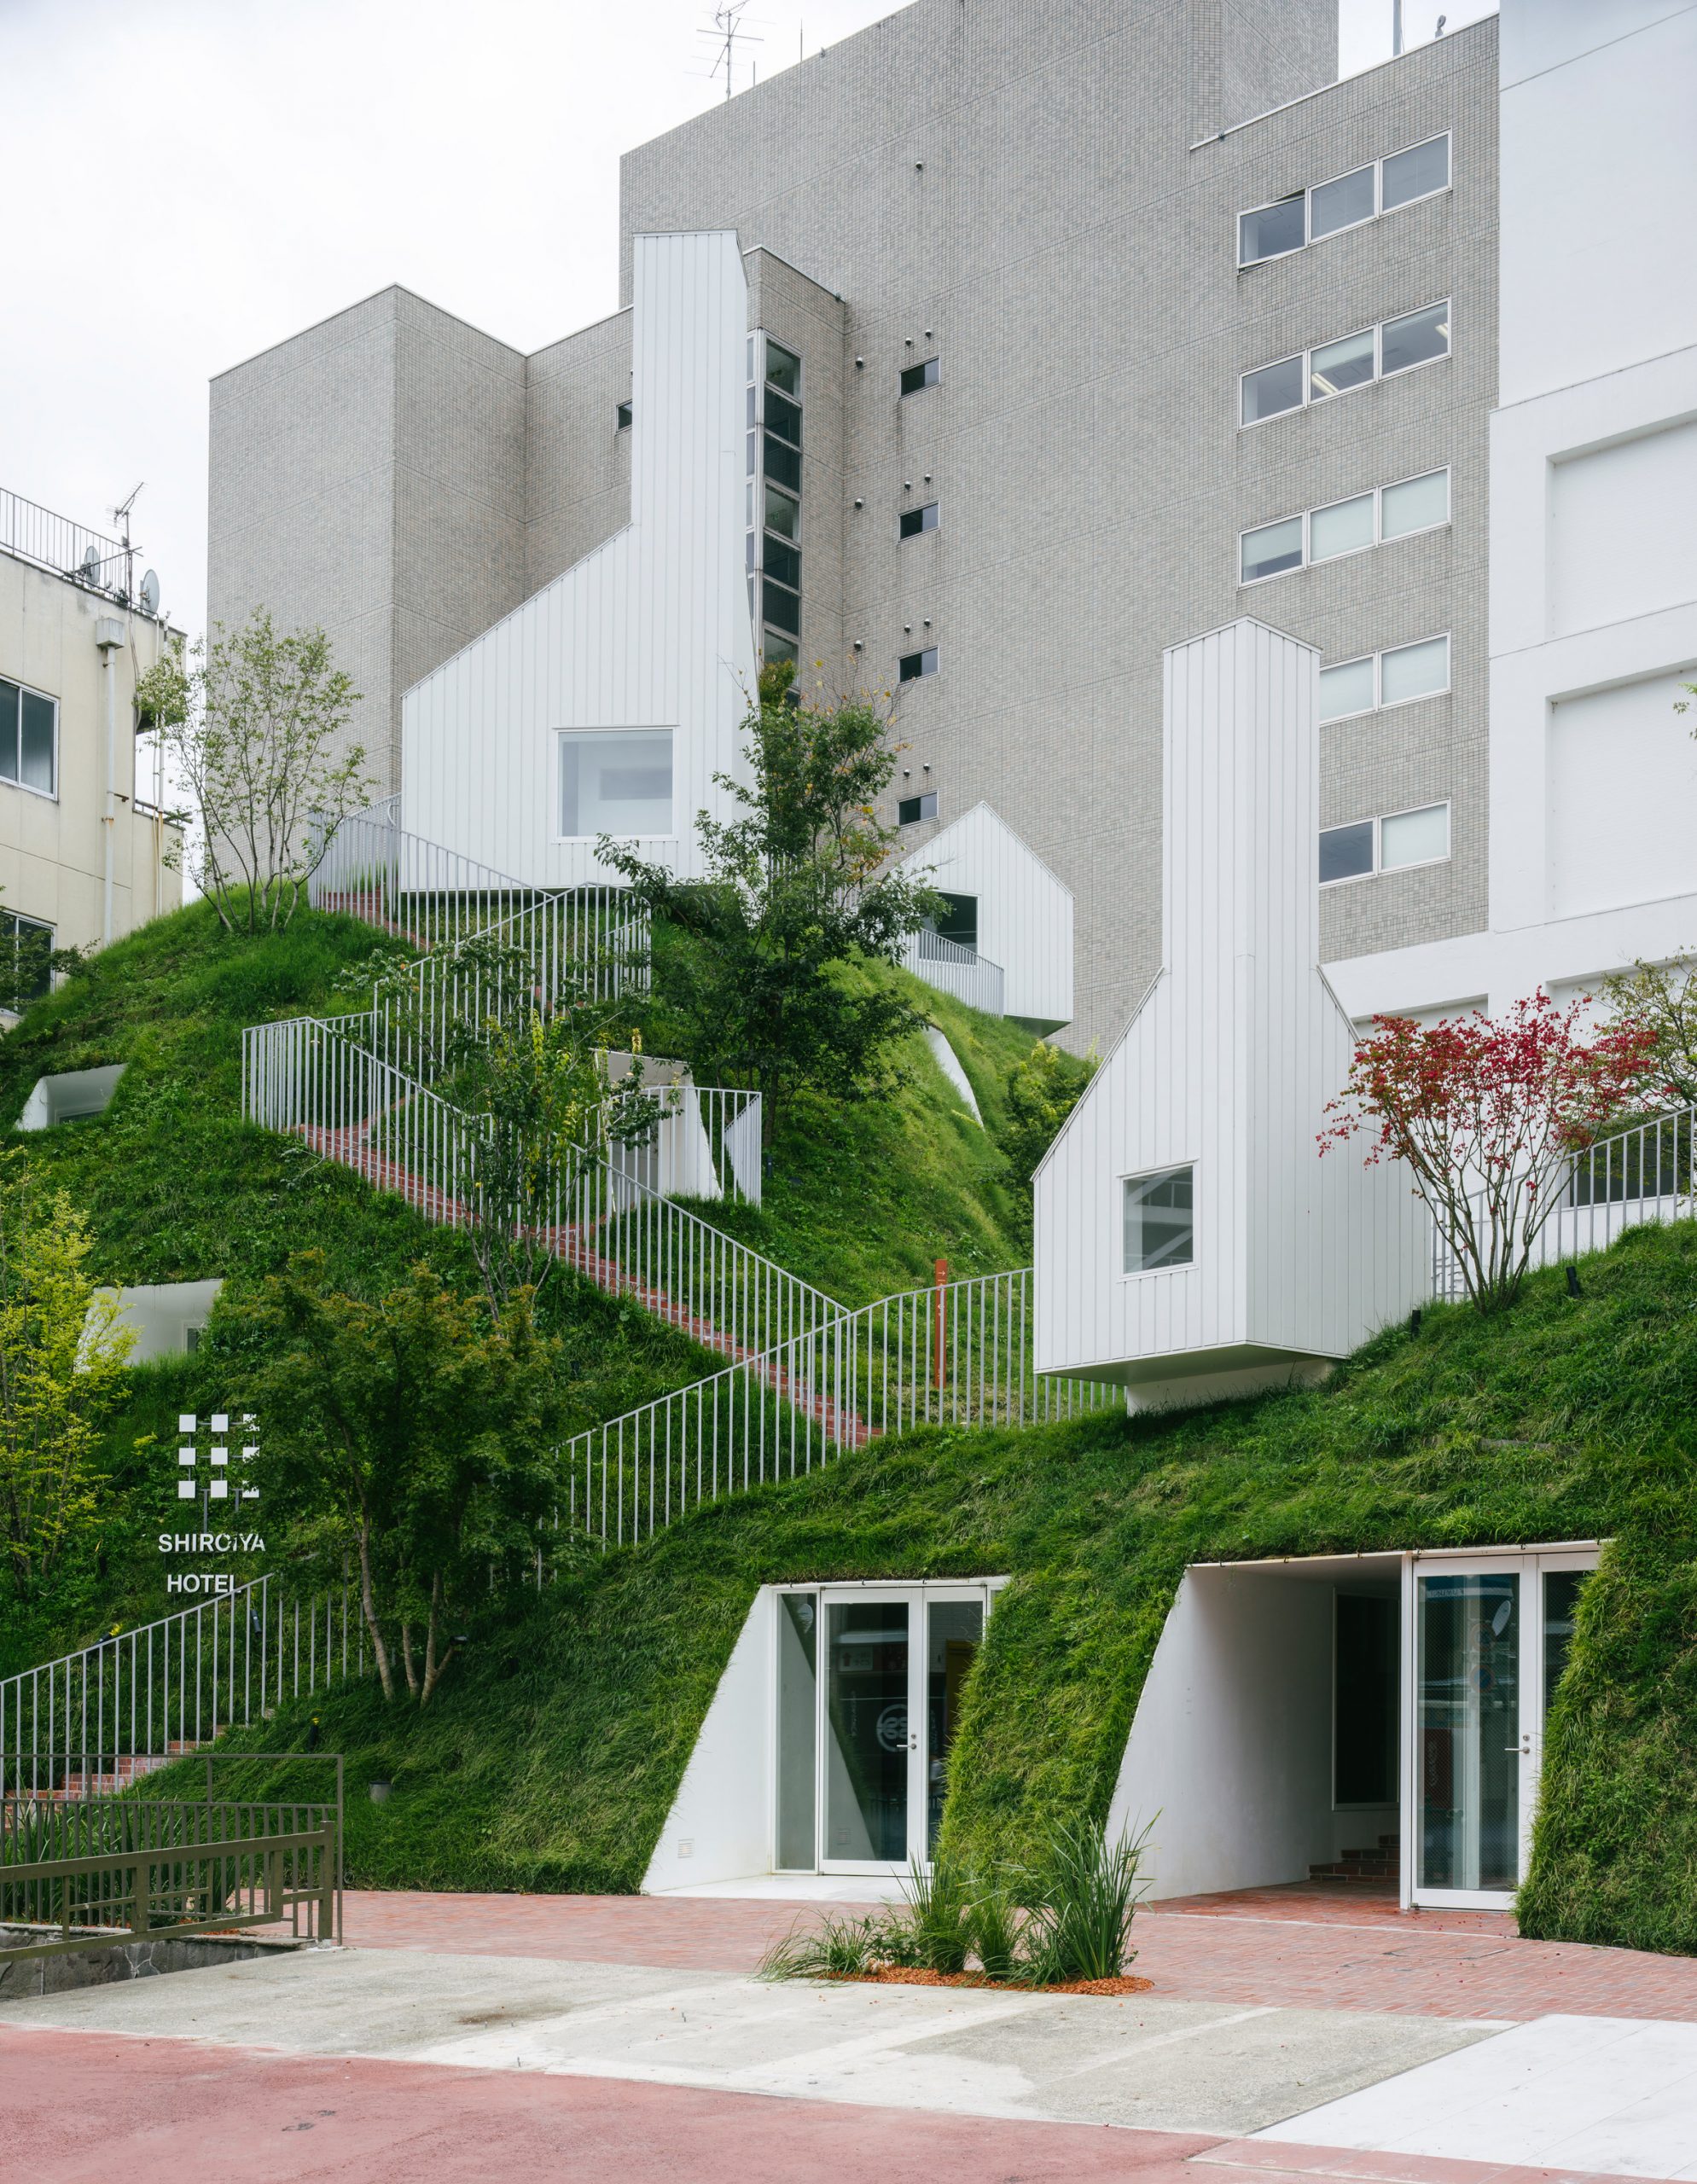 Hotel extension covered in grass